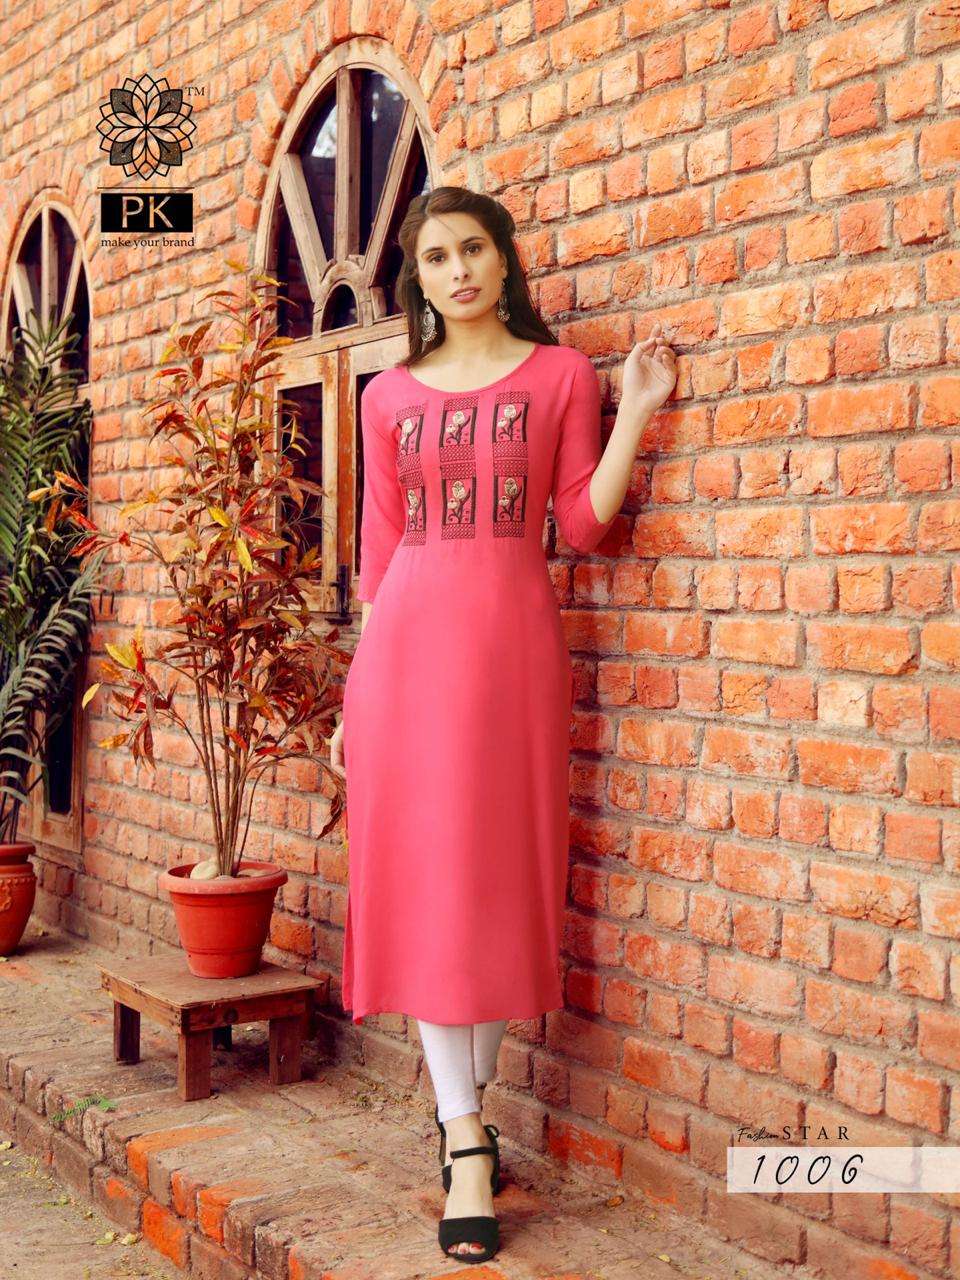 FASHION STAR VOL-1 BY PK 1001 TO 1010 SERIES BEAUTIFUL STYLISH COLORFUL FANCY PARTY WEAR & ETHNIC WEAR & READY TO WEAR HEAVY RAYON EMBROIDERED KURTIS AT WHOLESALE PRICE